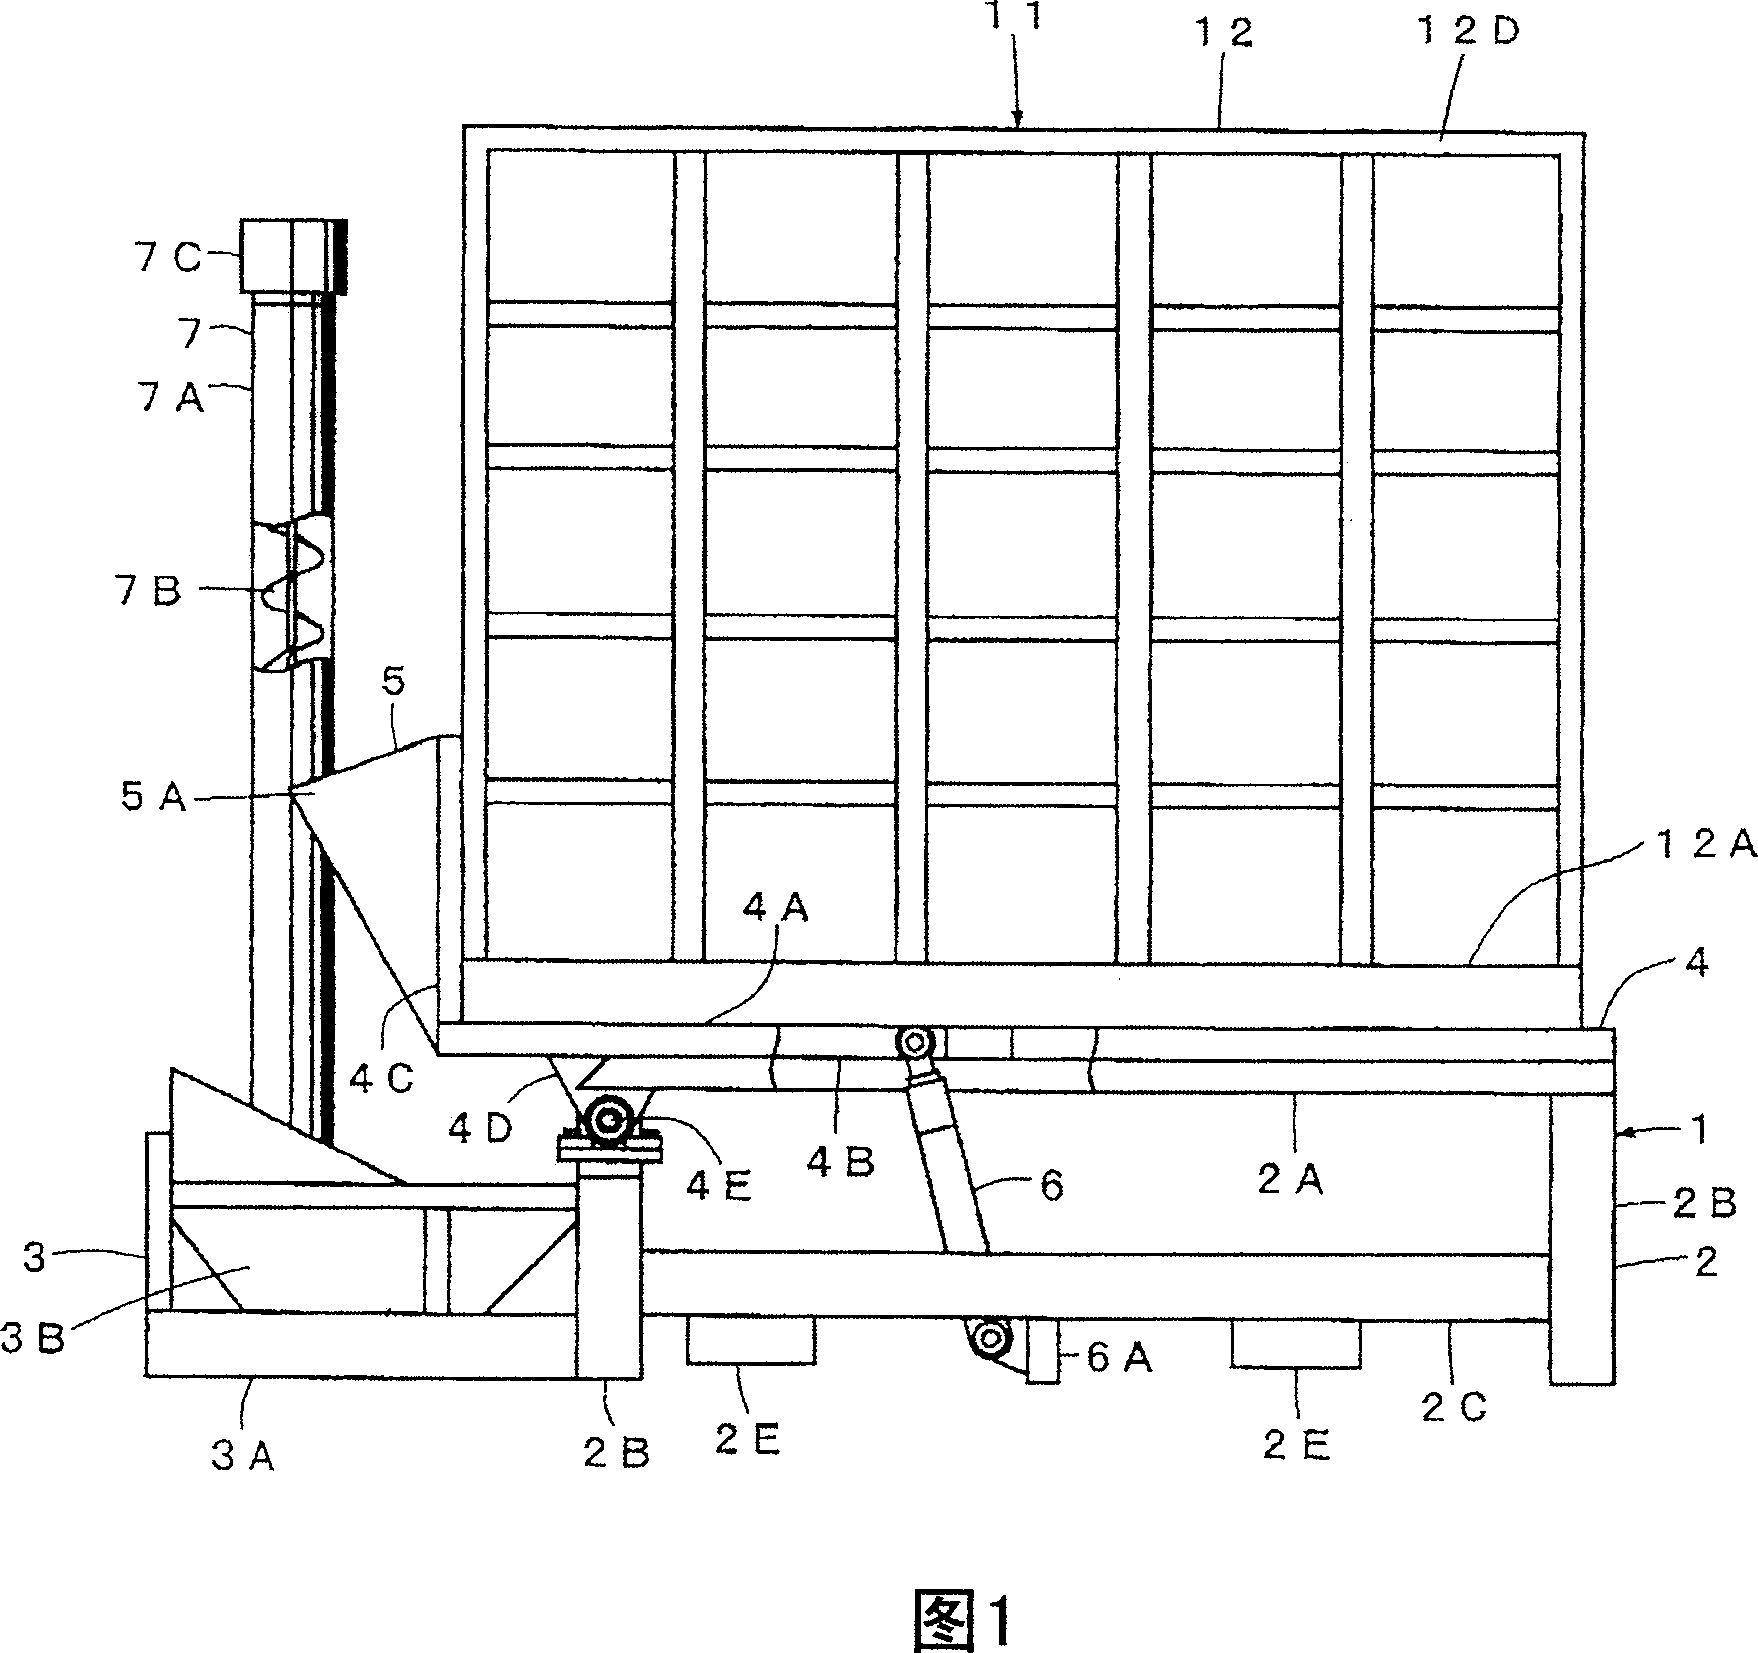 Container device for fertilizer dispatching